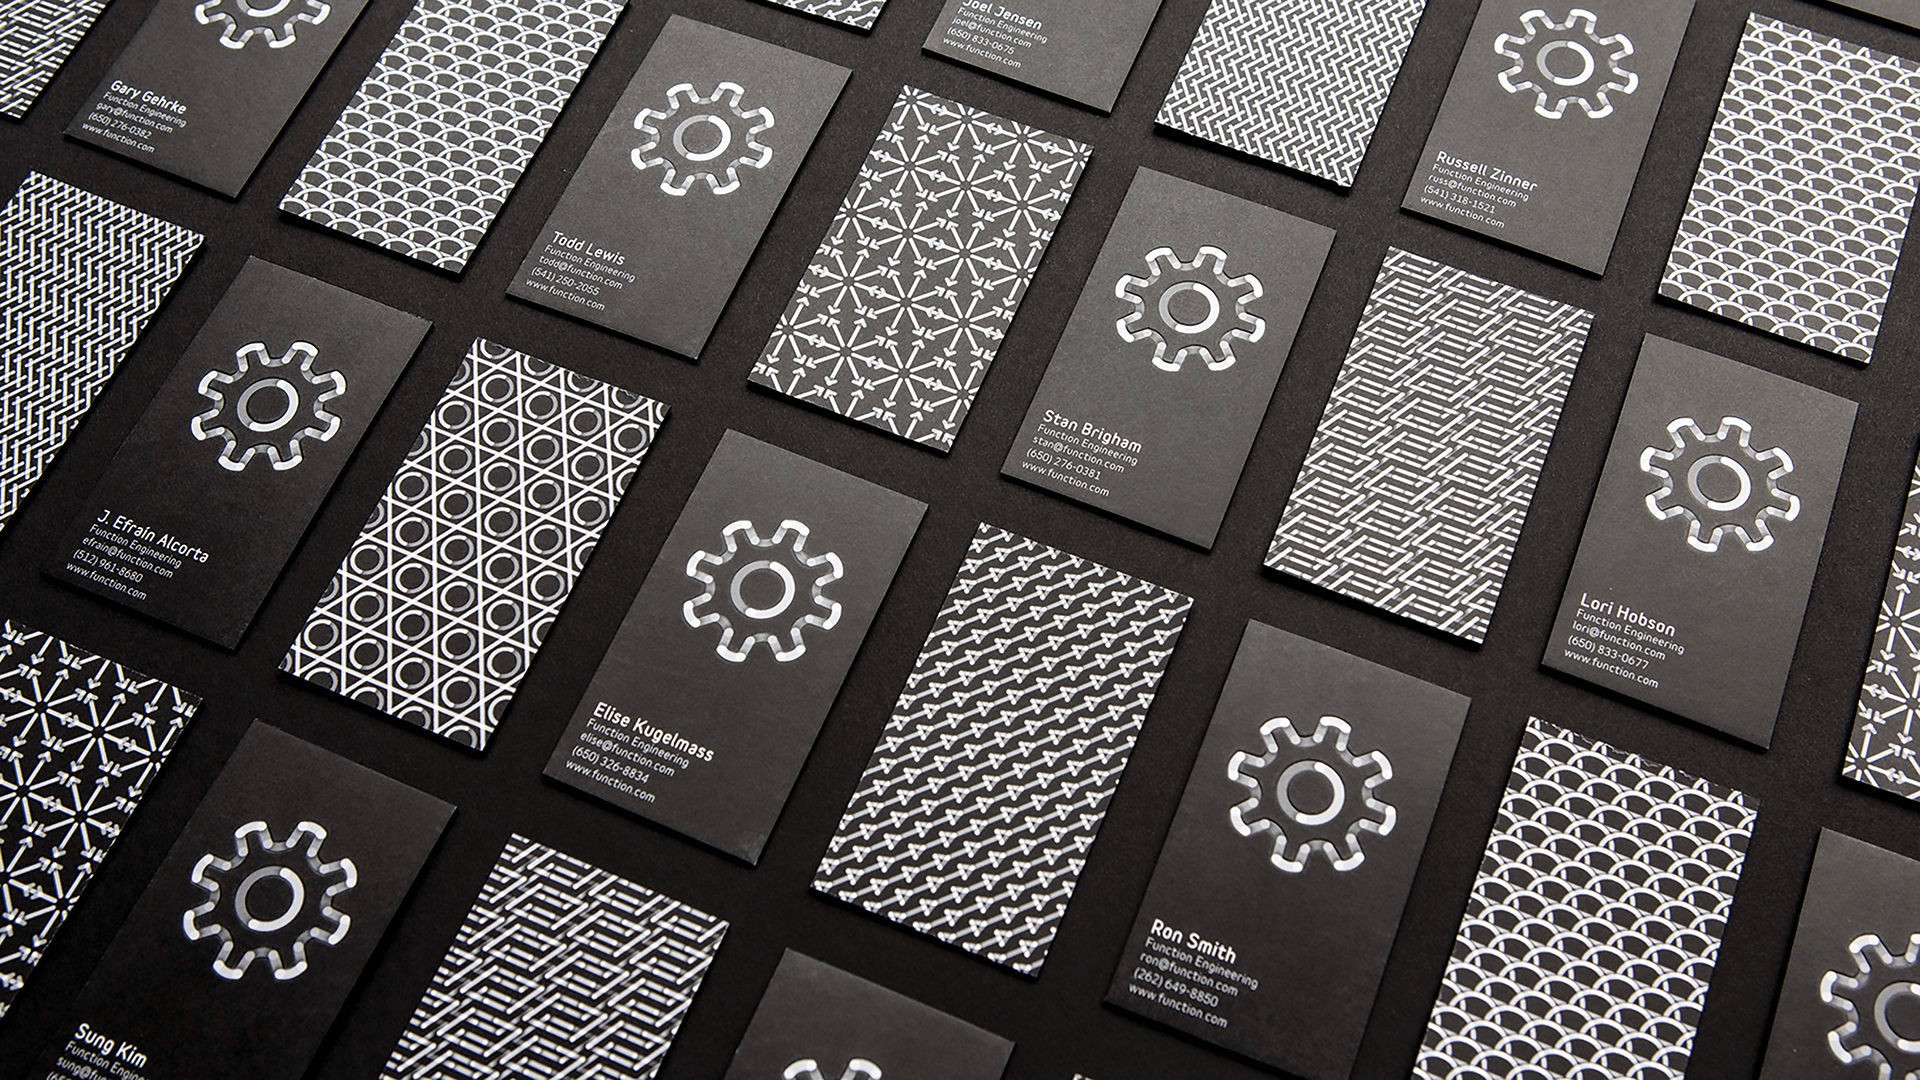 Surface covered with presentation cards filled with line patterns made from hinge motifs.